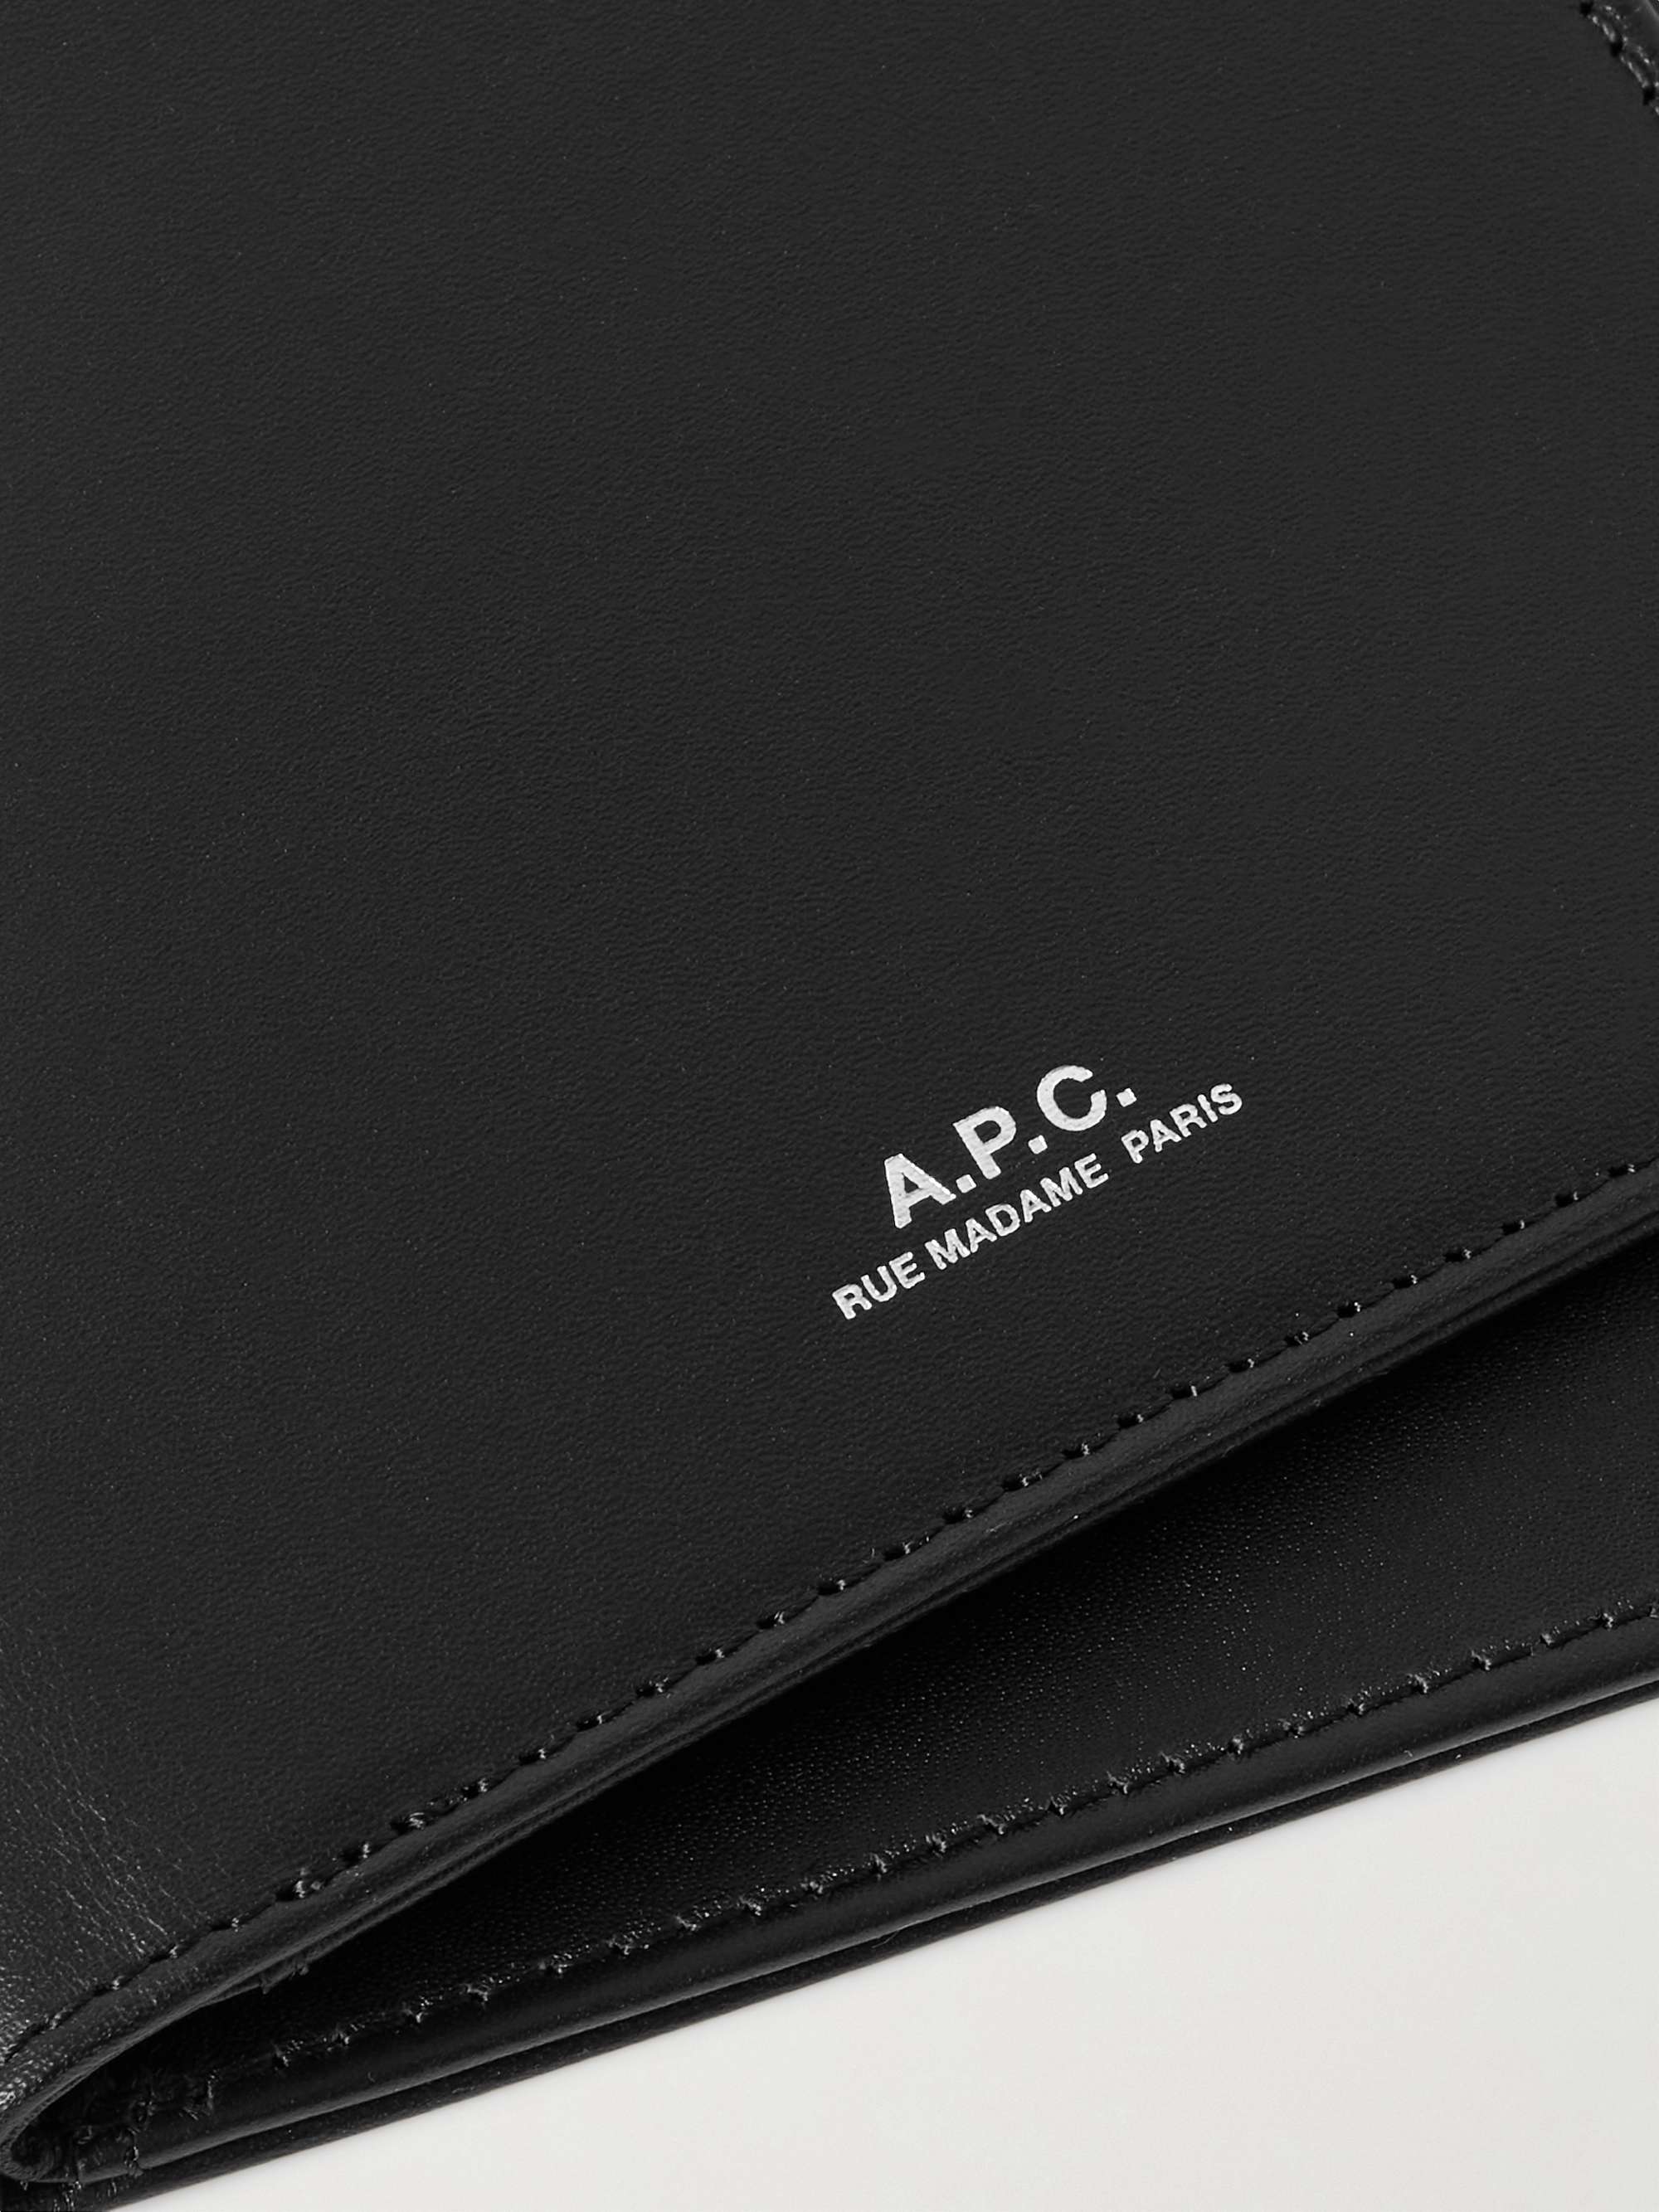 A.P.C. Leather Billfold Wallet